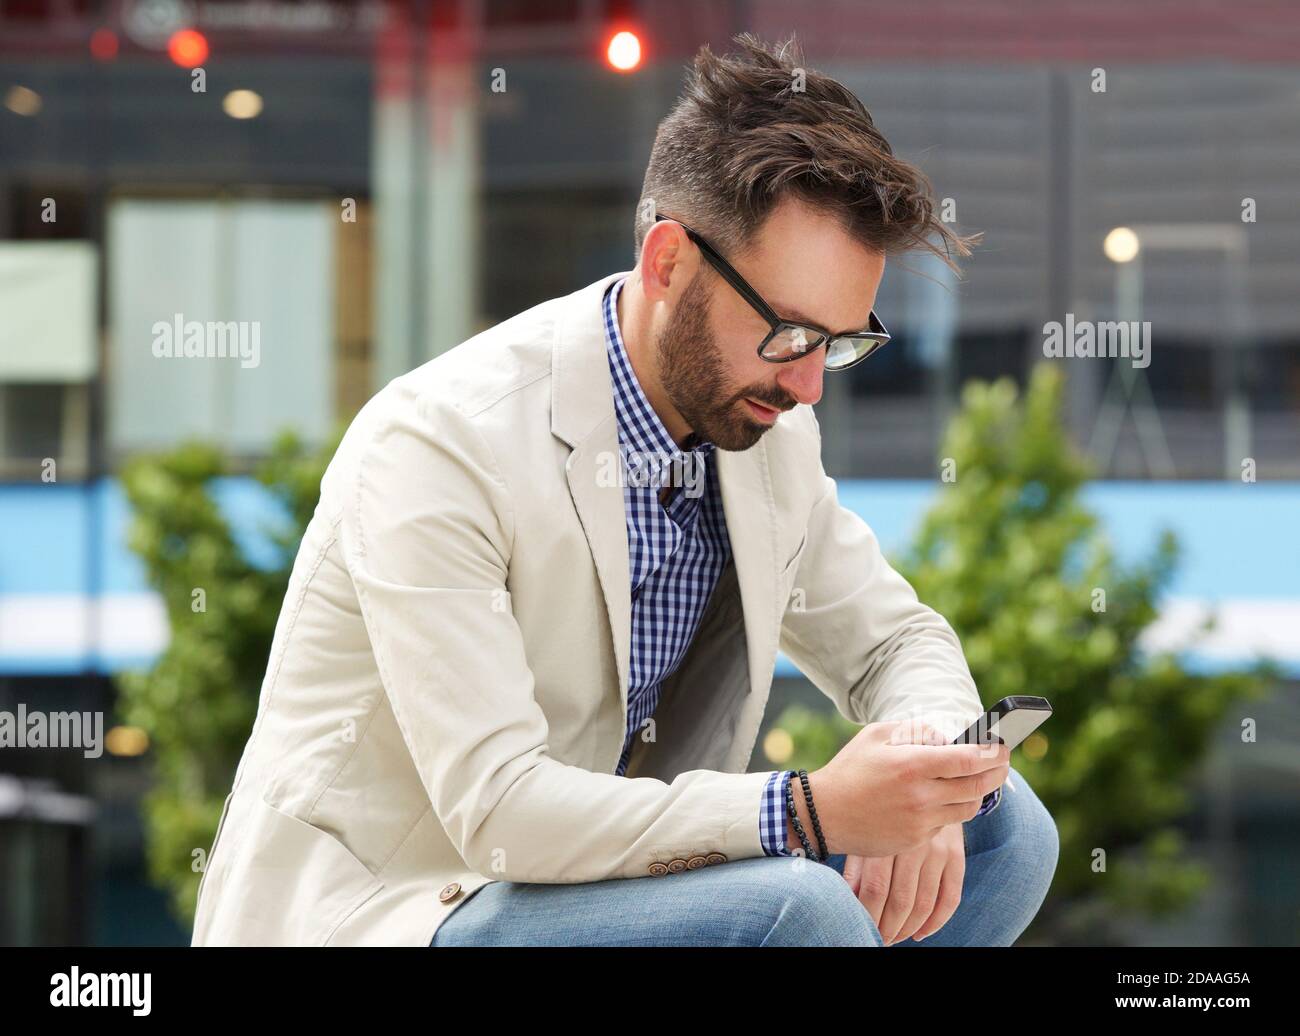 Side portrait of older man sitting outdoors and reading text message on his mobile phone Stock Photo